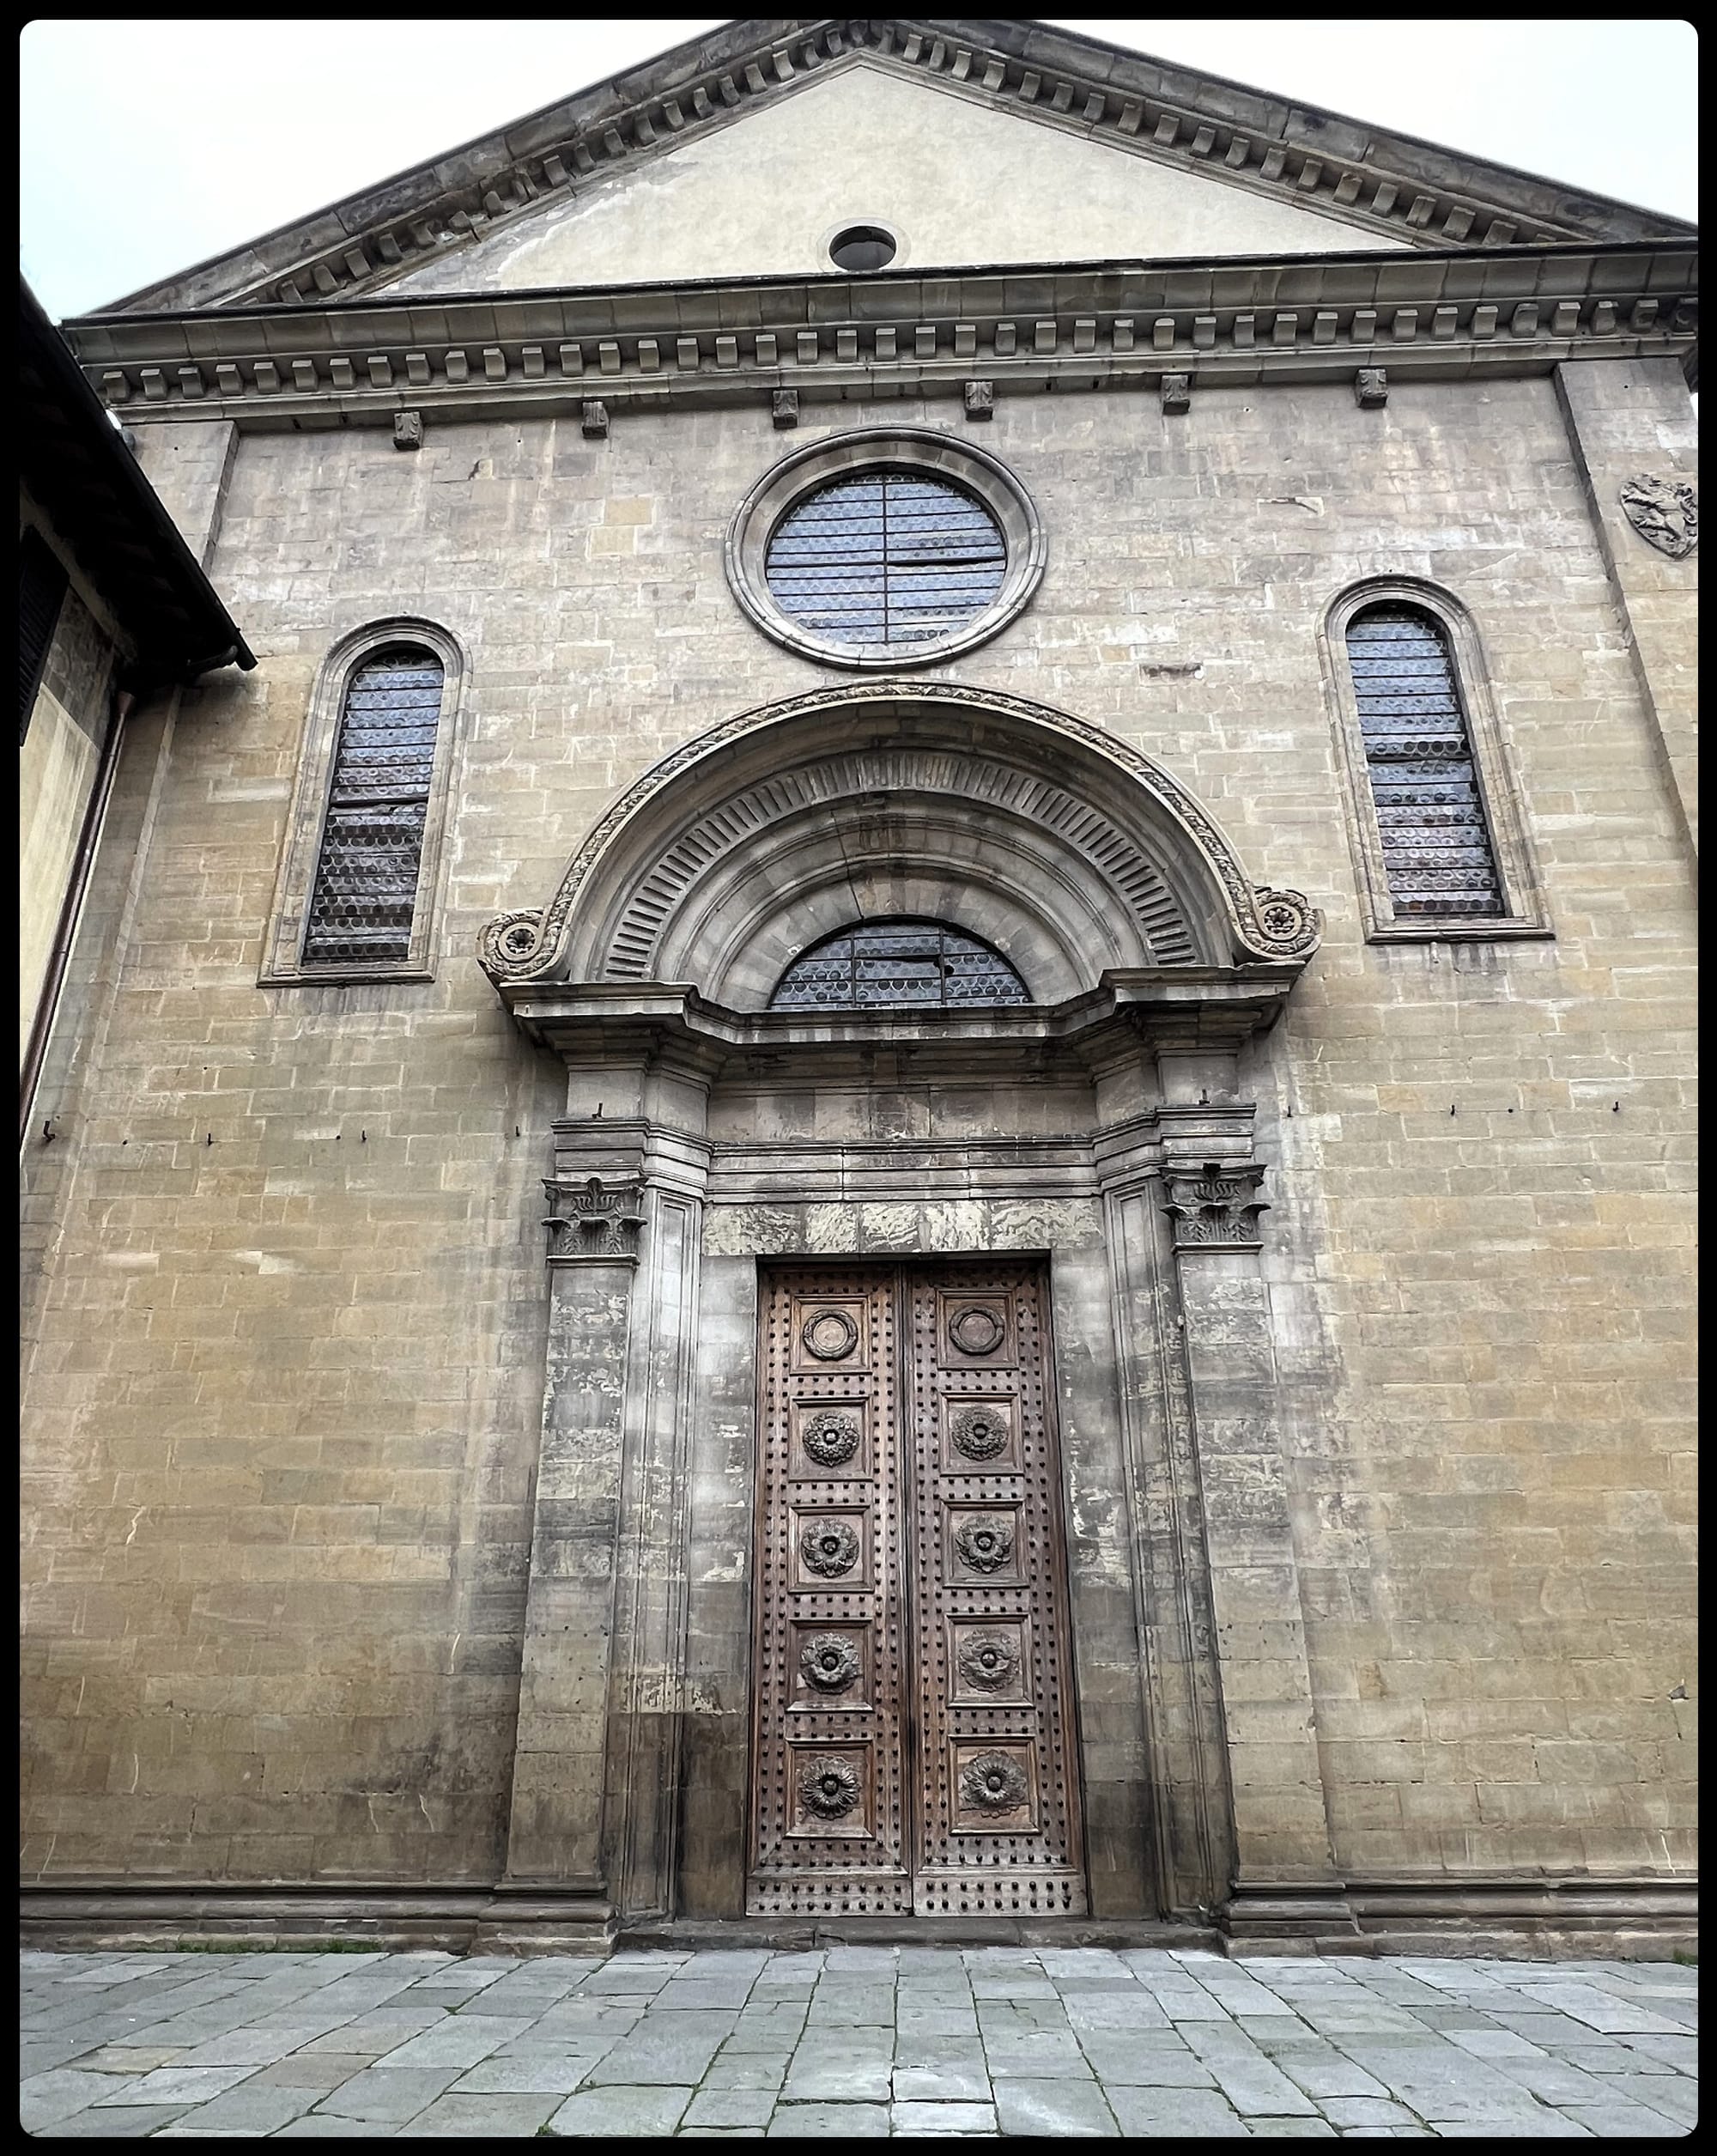 A view of the front doors and front facade of the Chiesa di San Felice, a church in Florence's Oltrarno neighborhood, first built in the eleventh century.